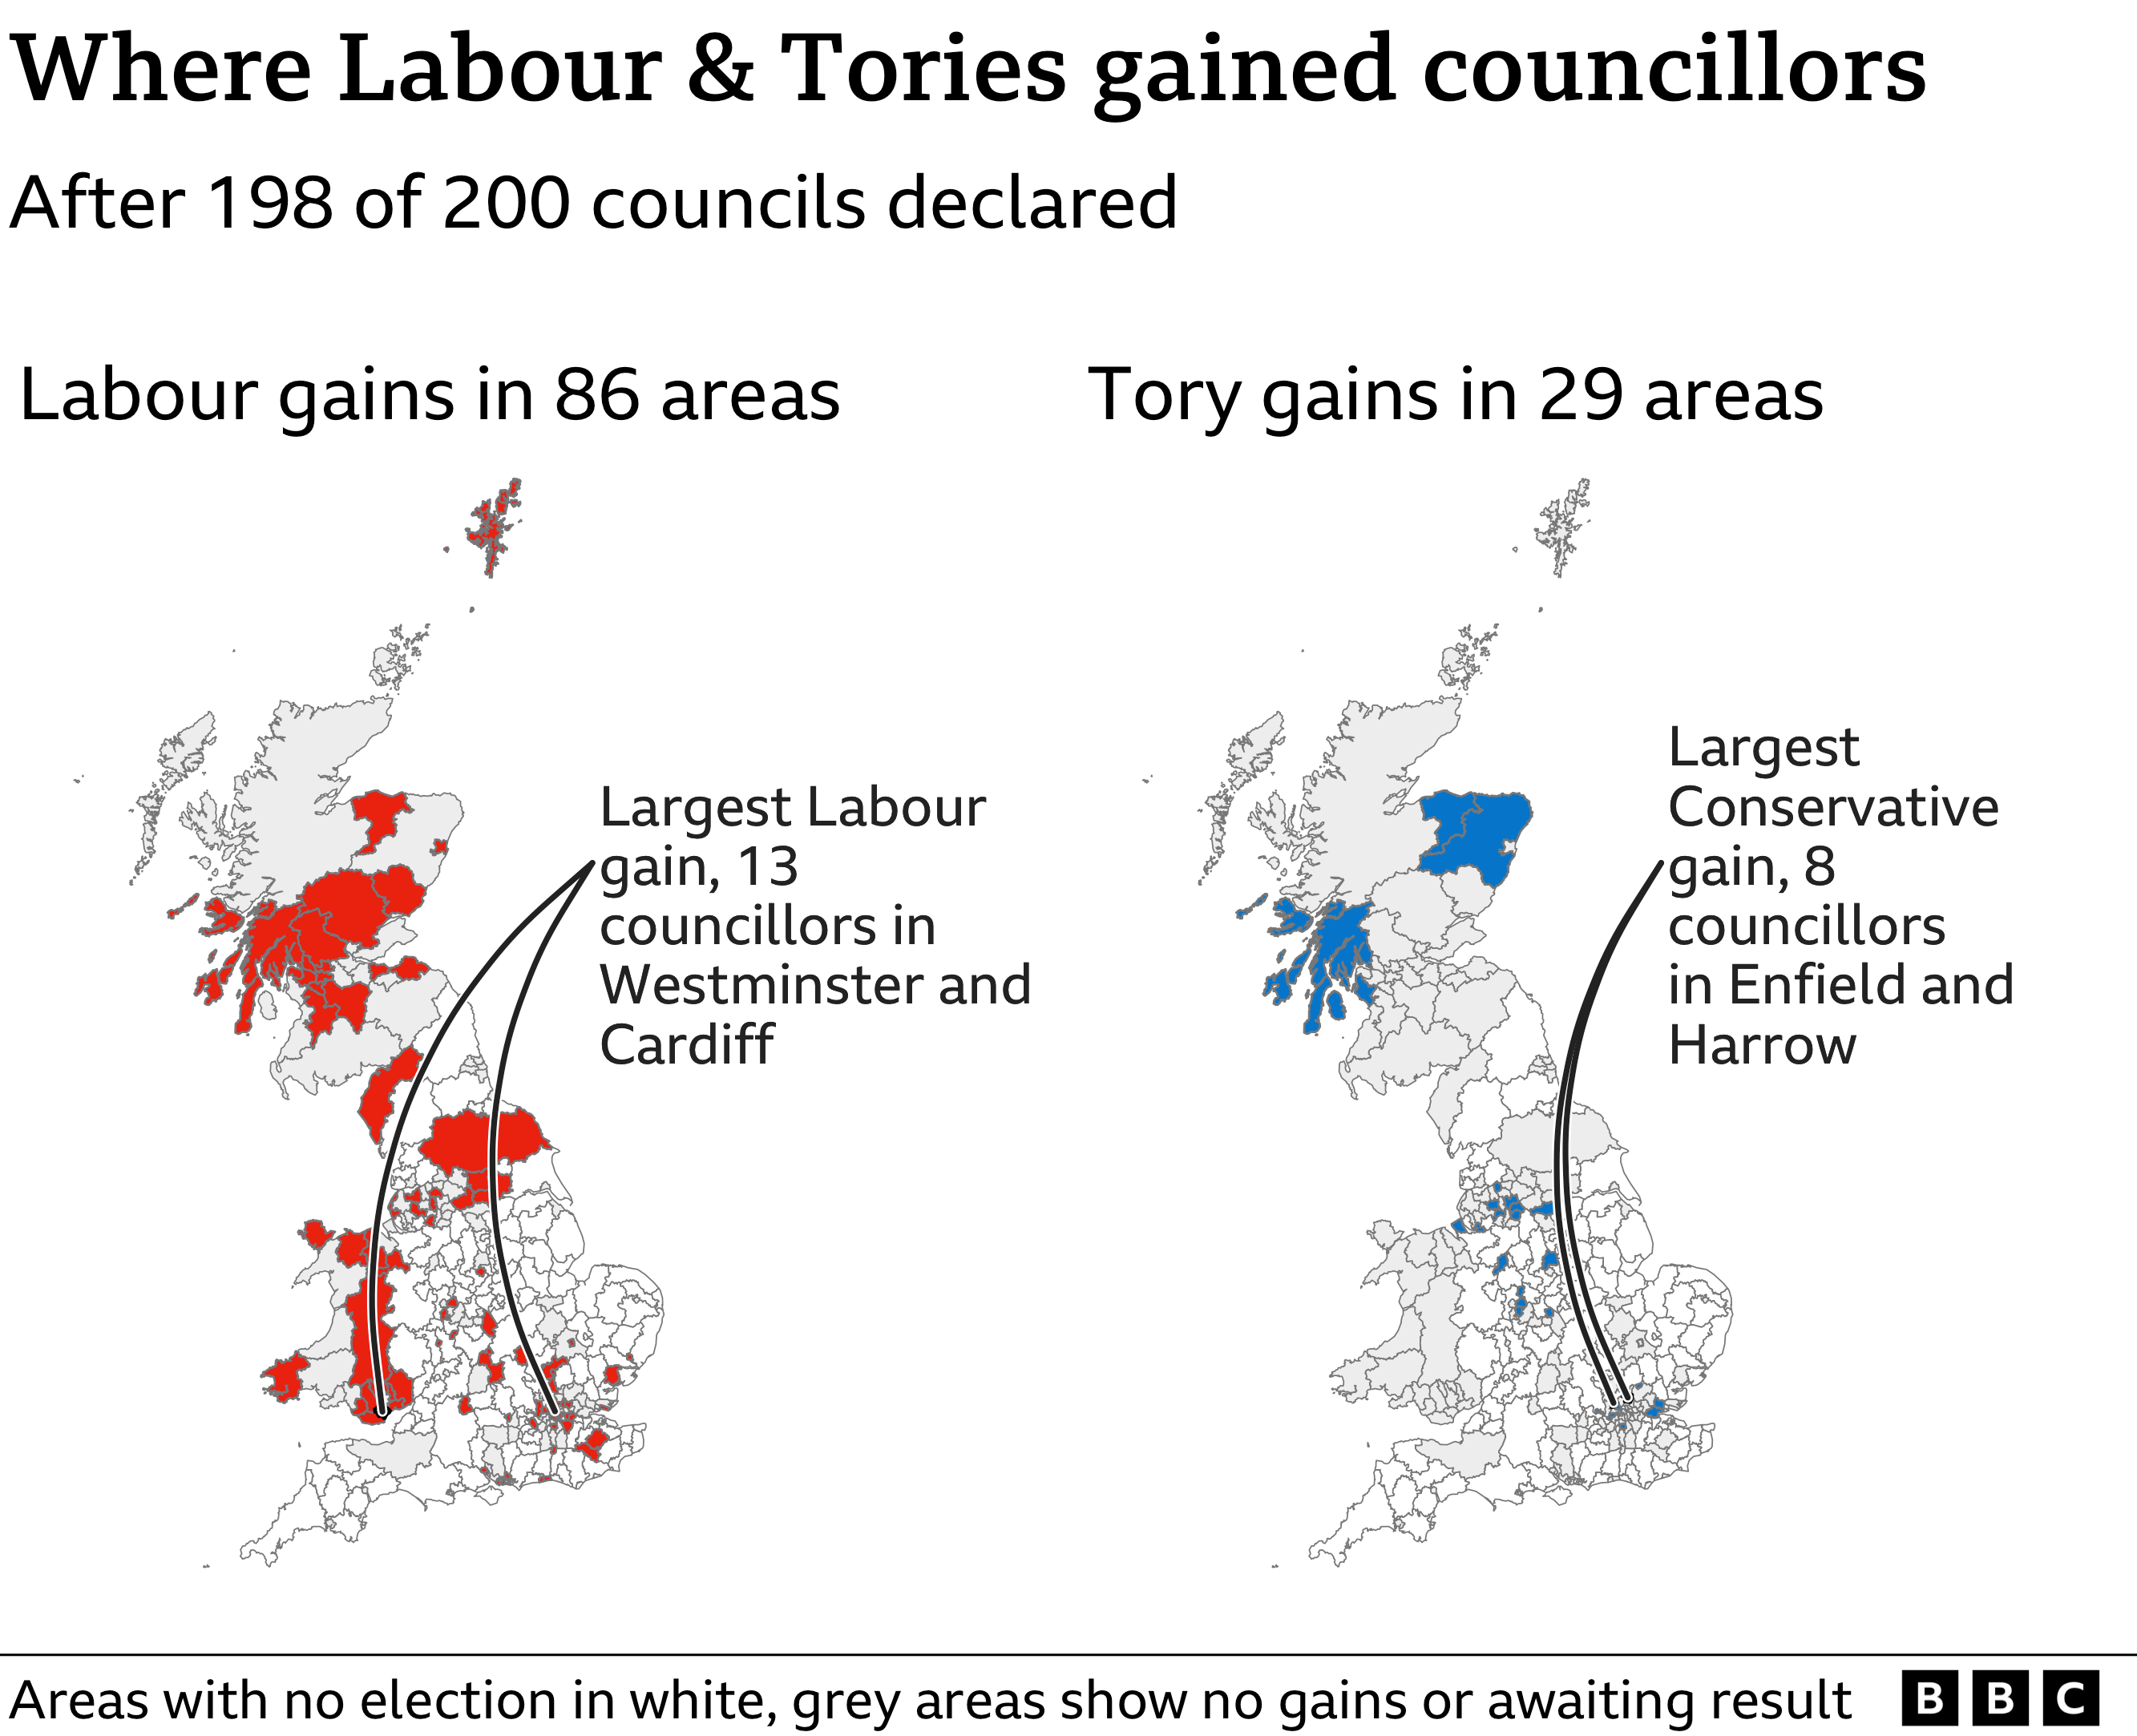 Map showing where Labour & Tories gained councillors. Tory gains in 29 areas, Labour gains in 86 areas Largest Conservative gain, 8 councillors in Enfield and Harrow, Largest Labour gain, 13 councillors in Westminster and Cardiff